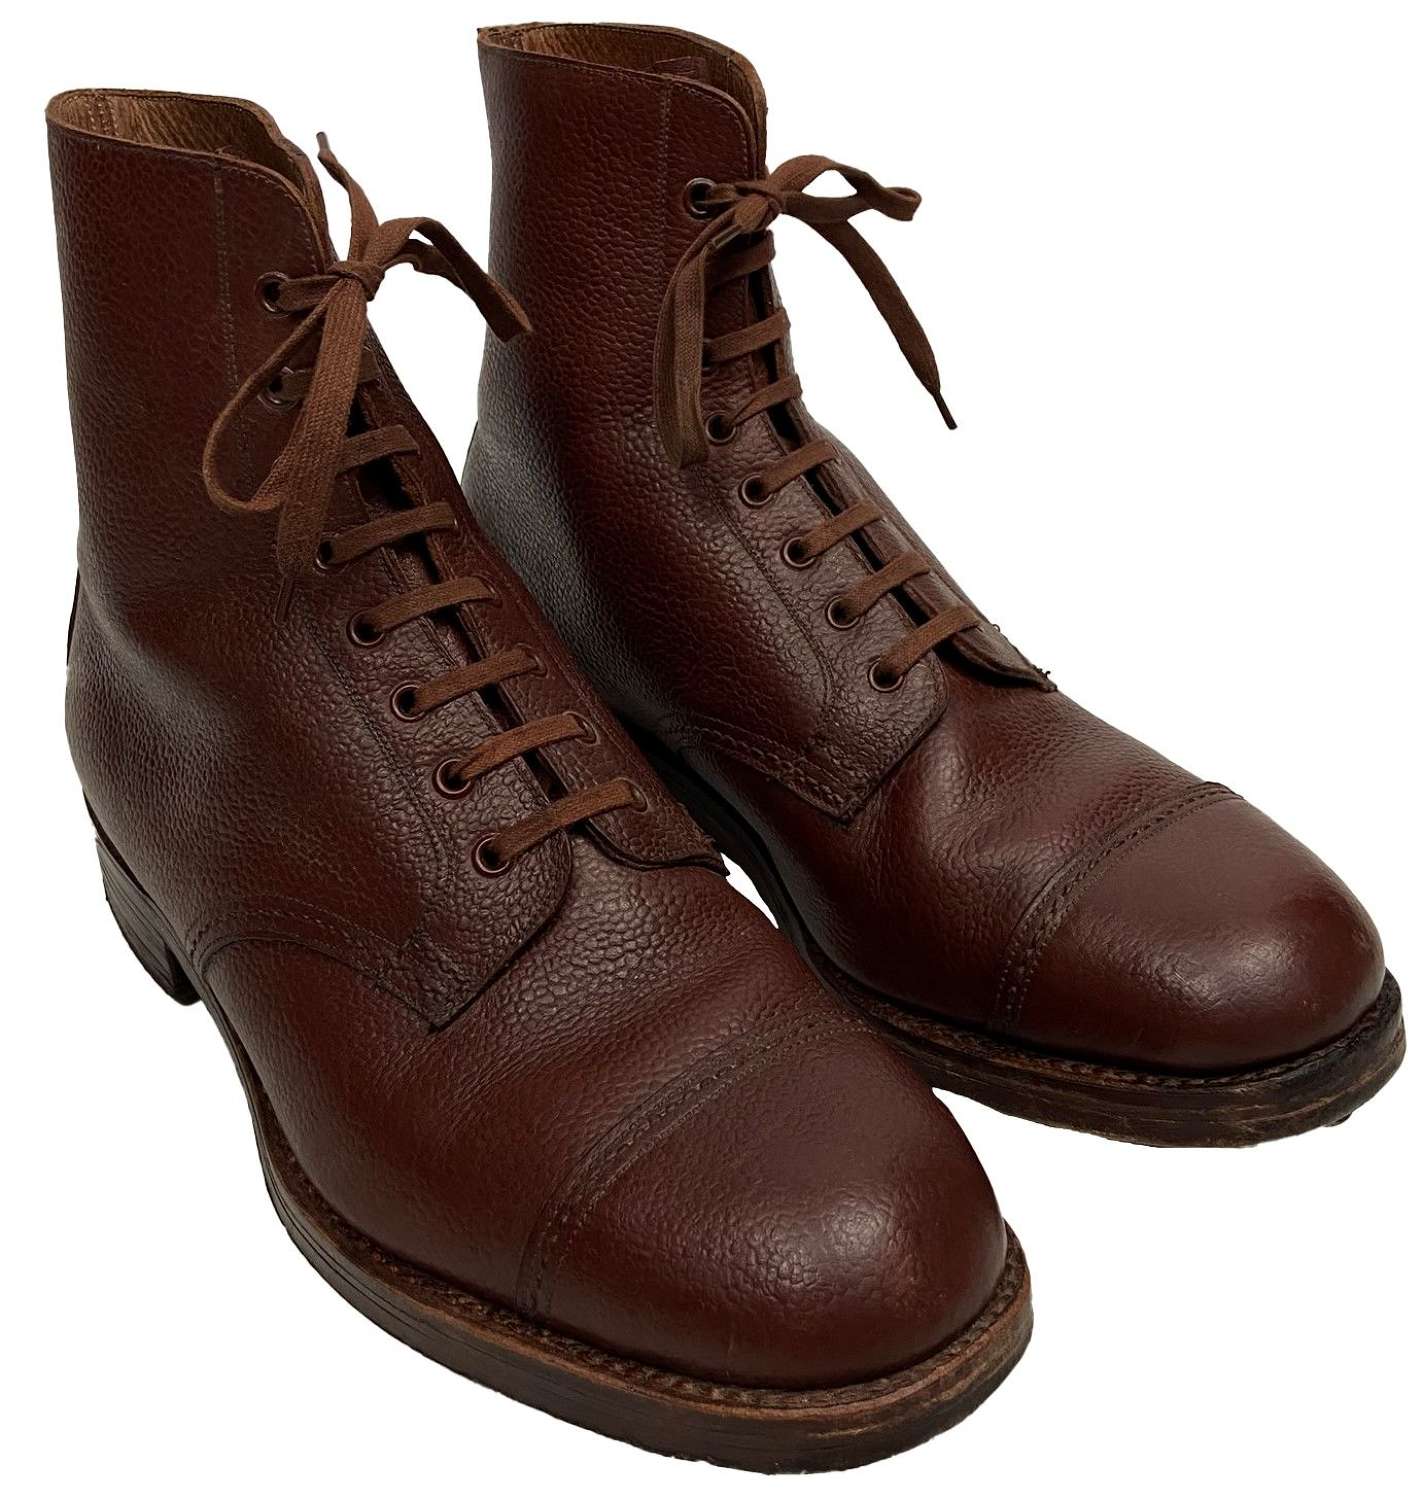 Stunning Original CC41 Men's Brown Leather Ankle Boots - Size 8